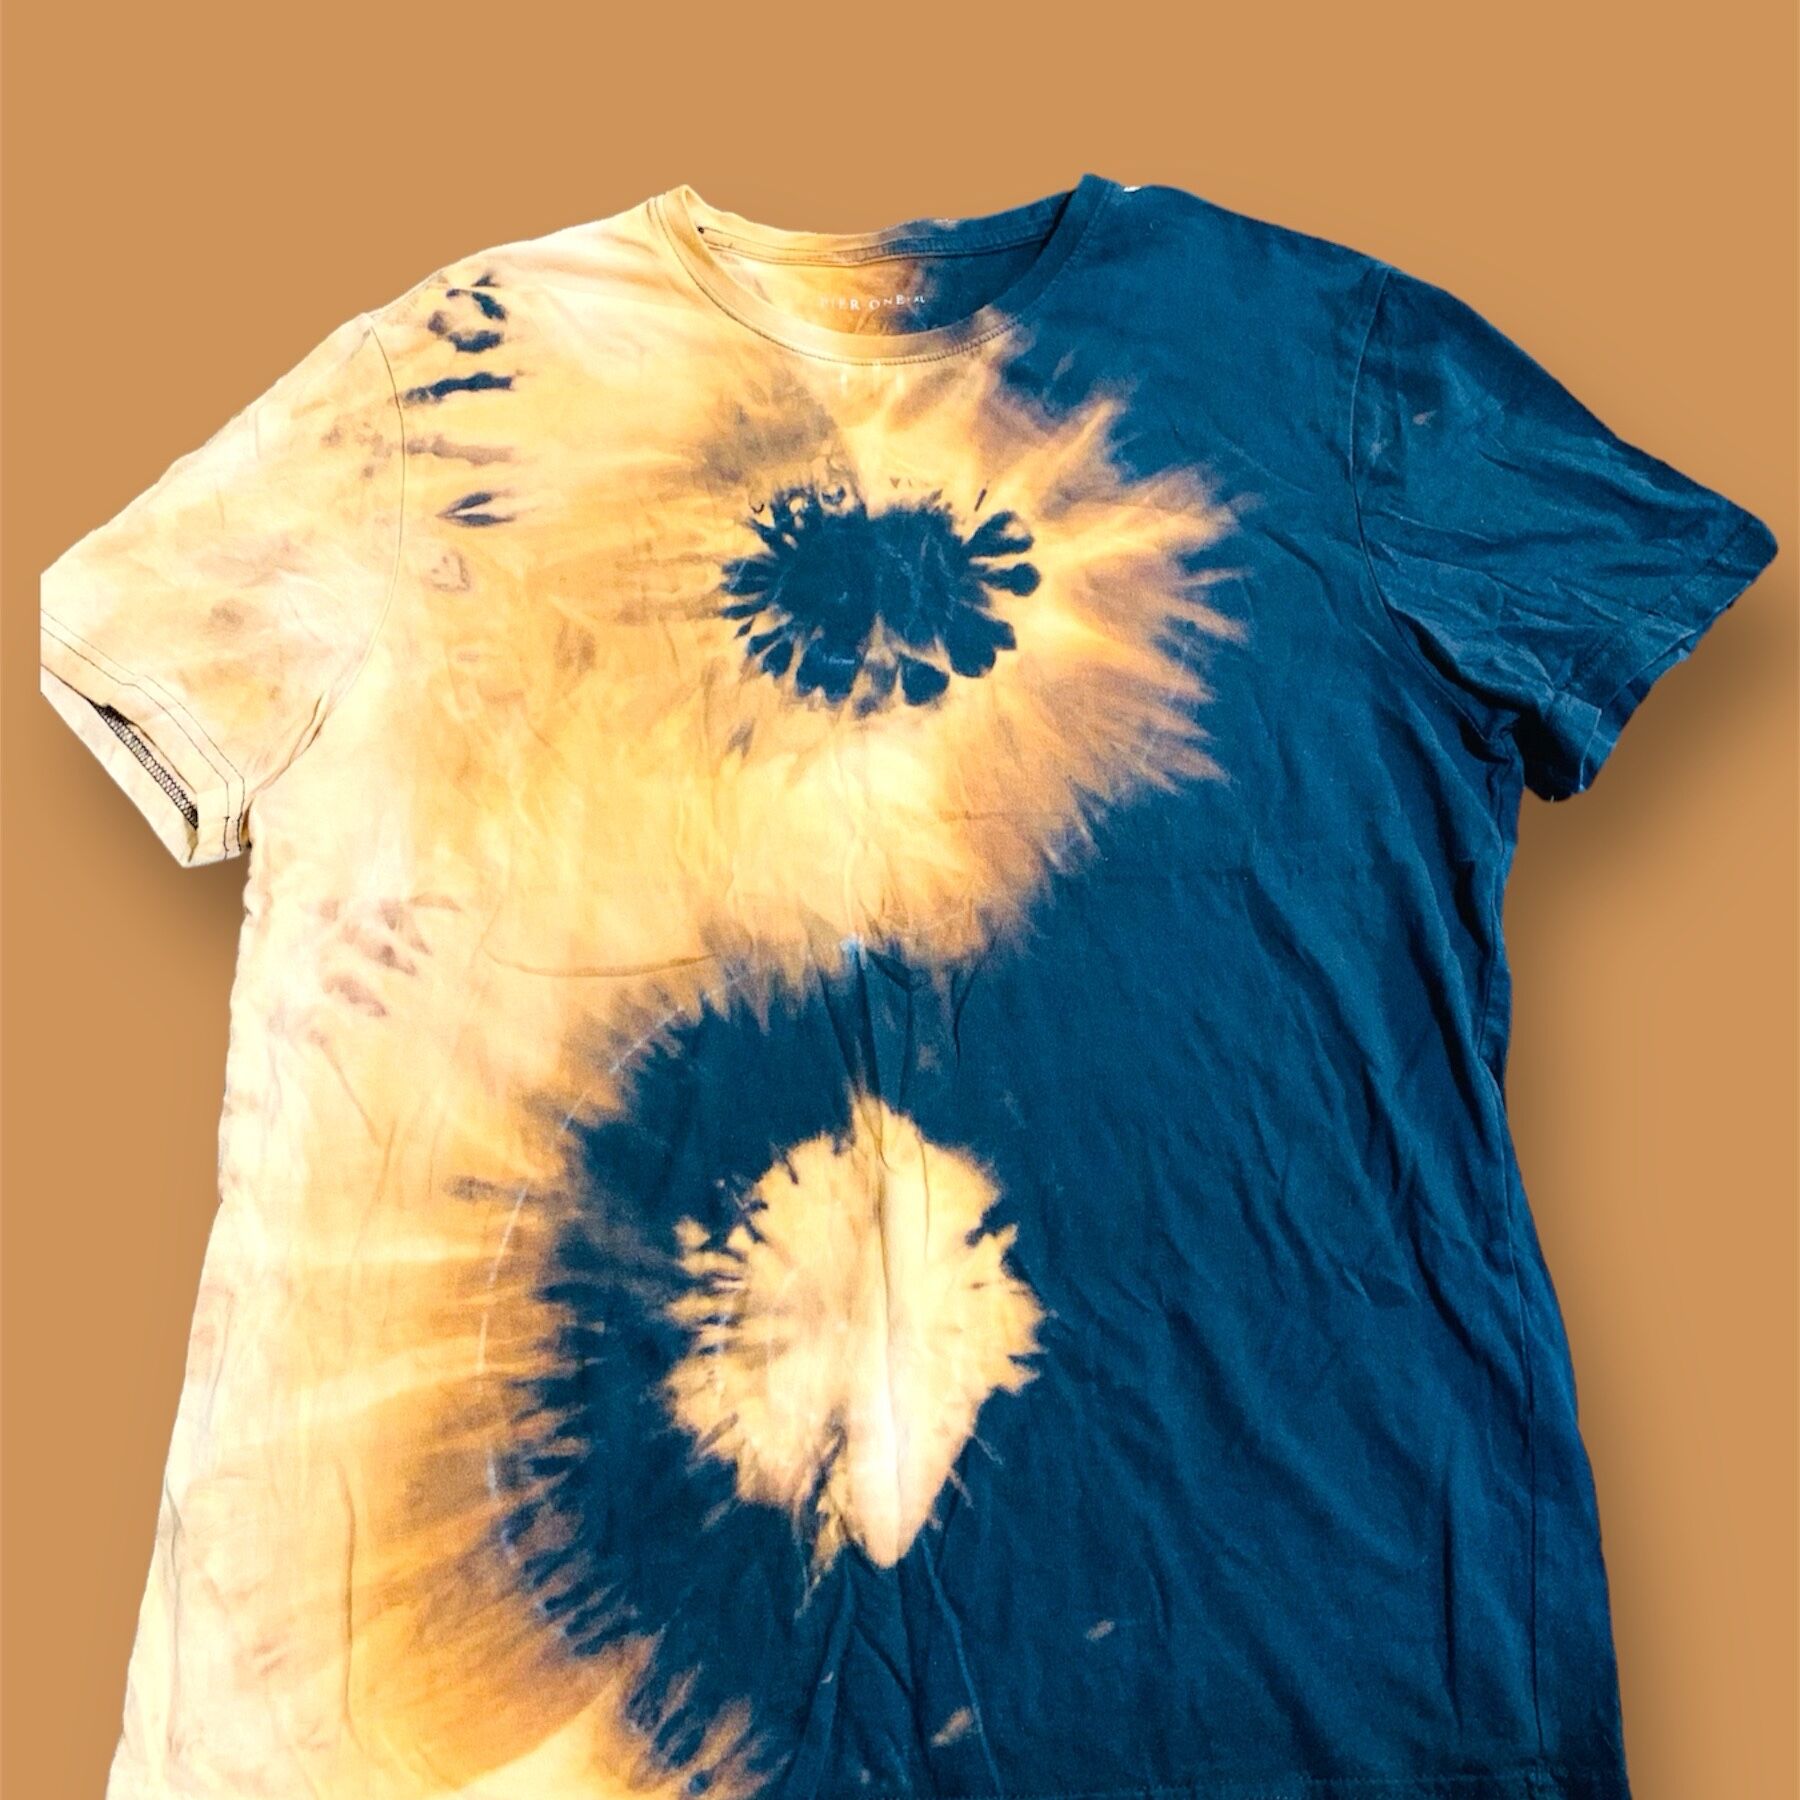 T-Shirt Tie and dye red